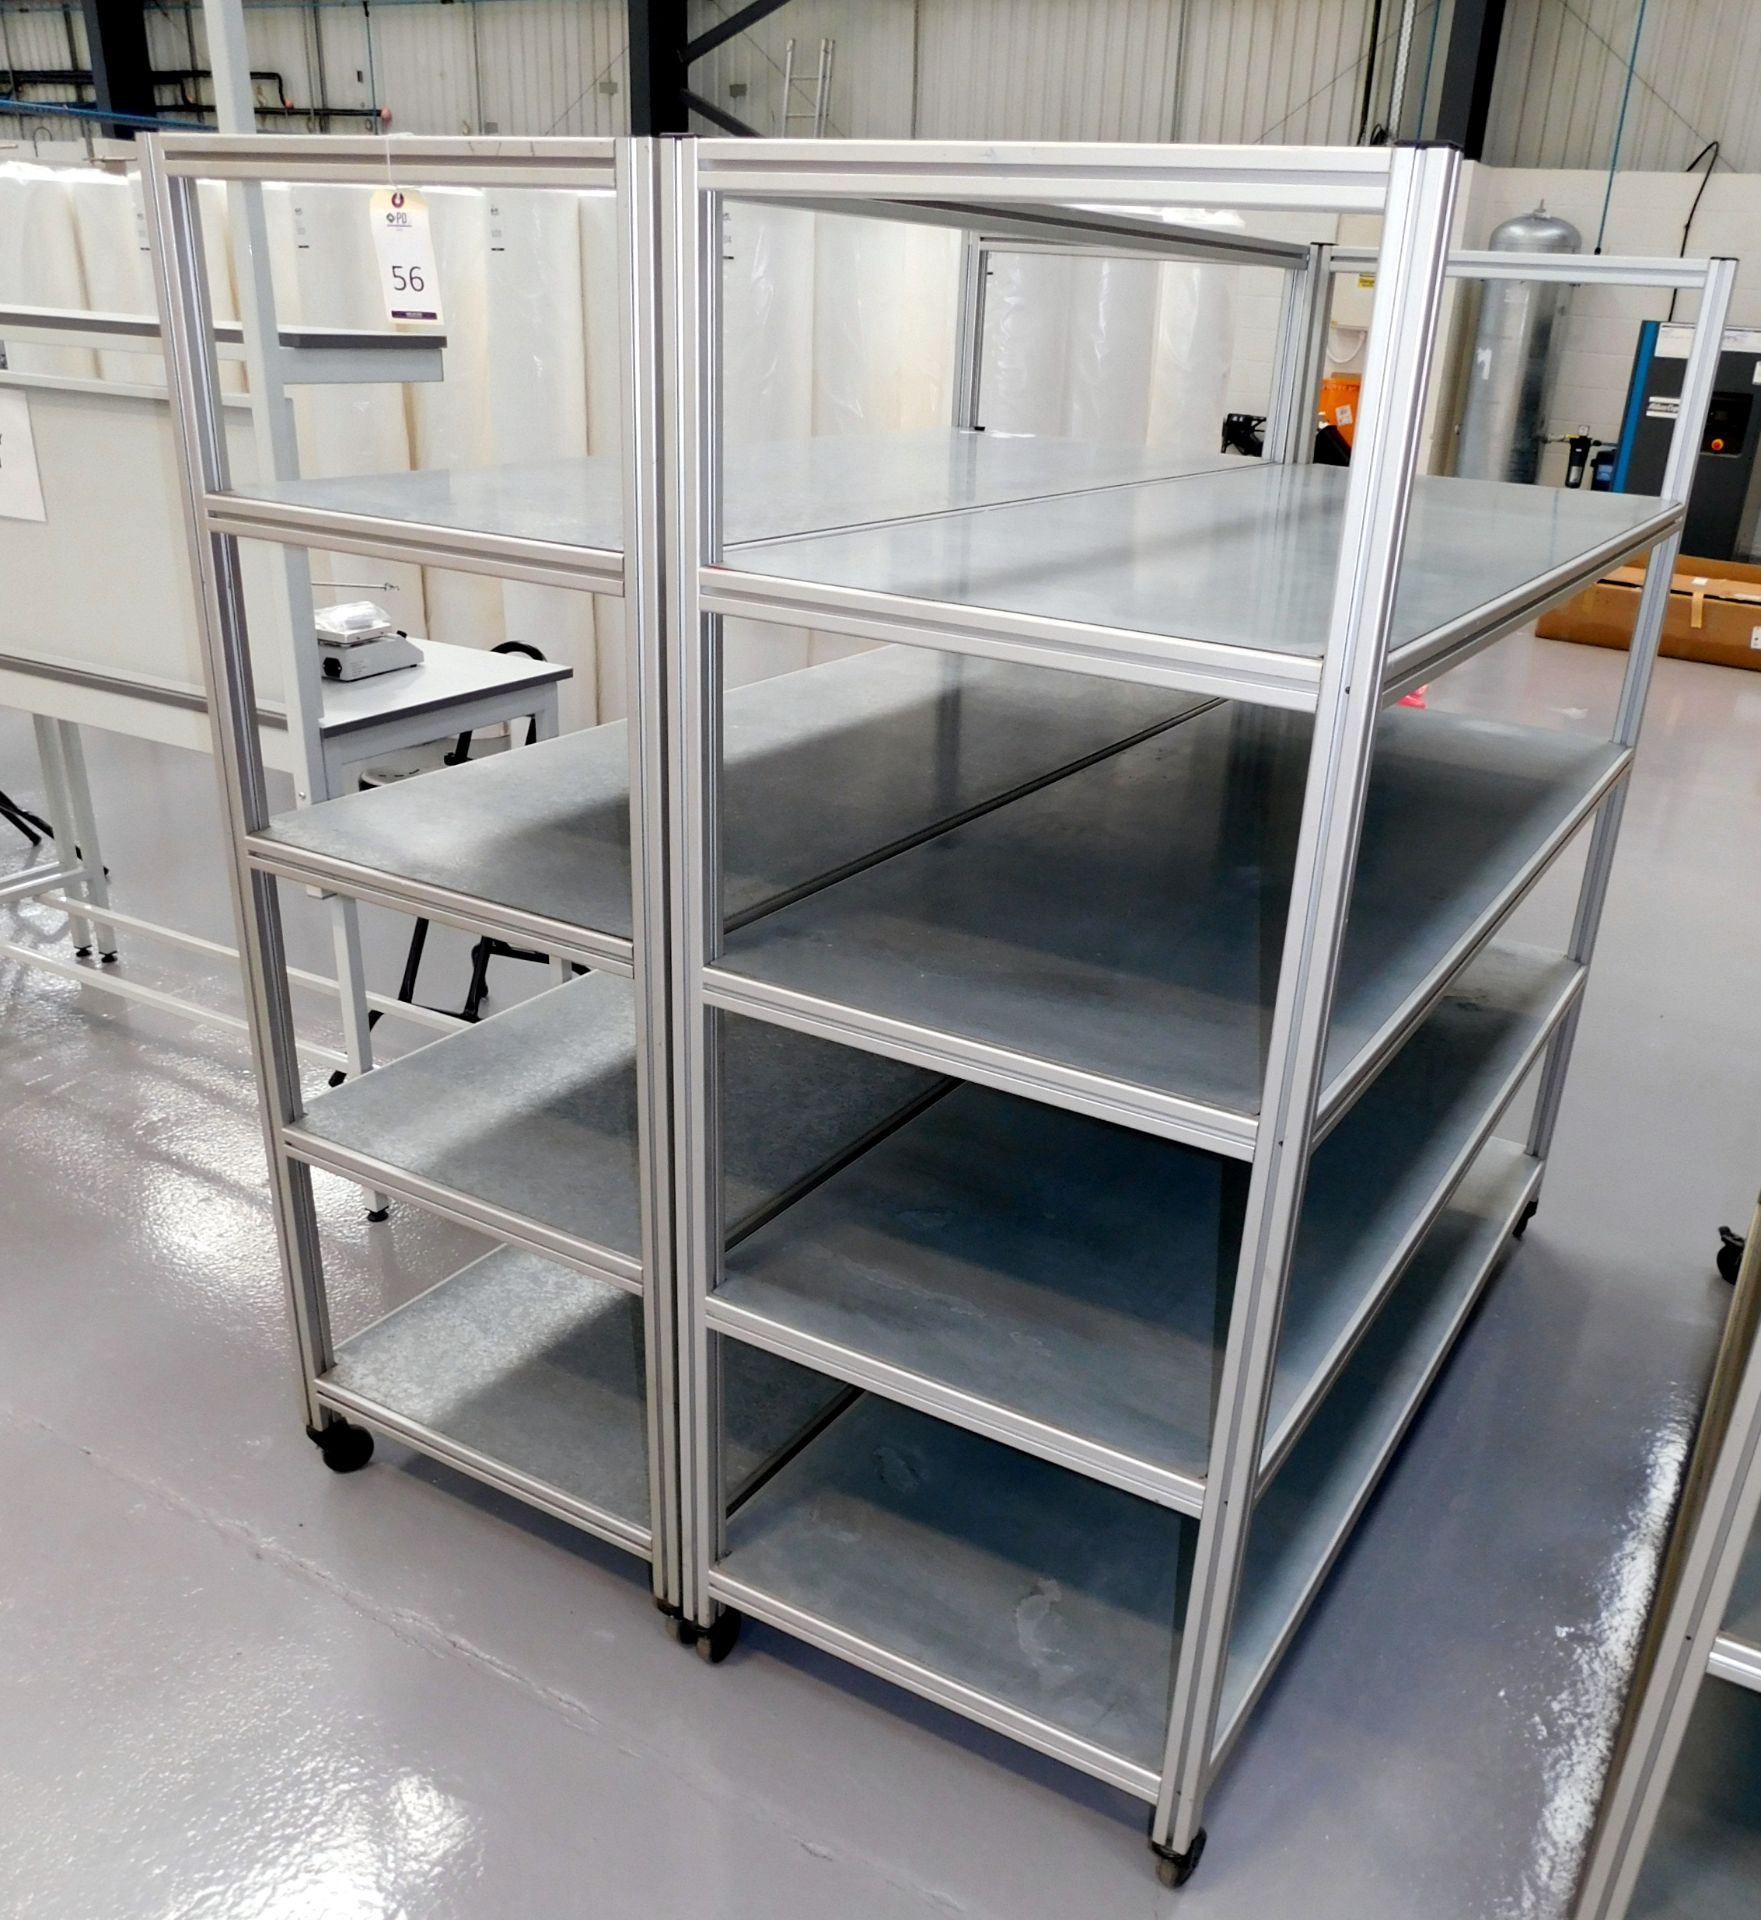 2 Fabricated 4-Tier Trollies (Each Approx. 176cm (W) x 67cm (D) x 170cm (H)) - Image 2 of 2